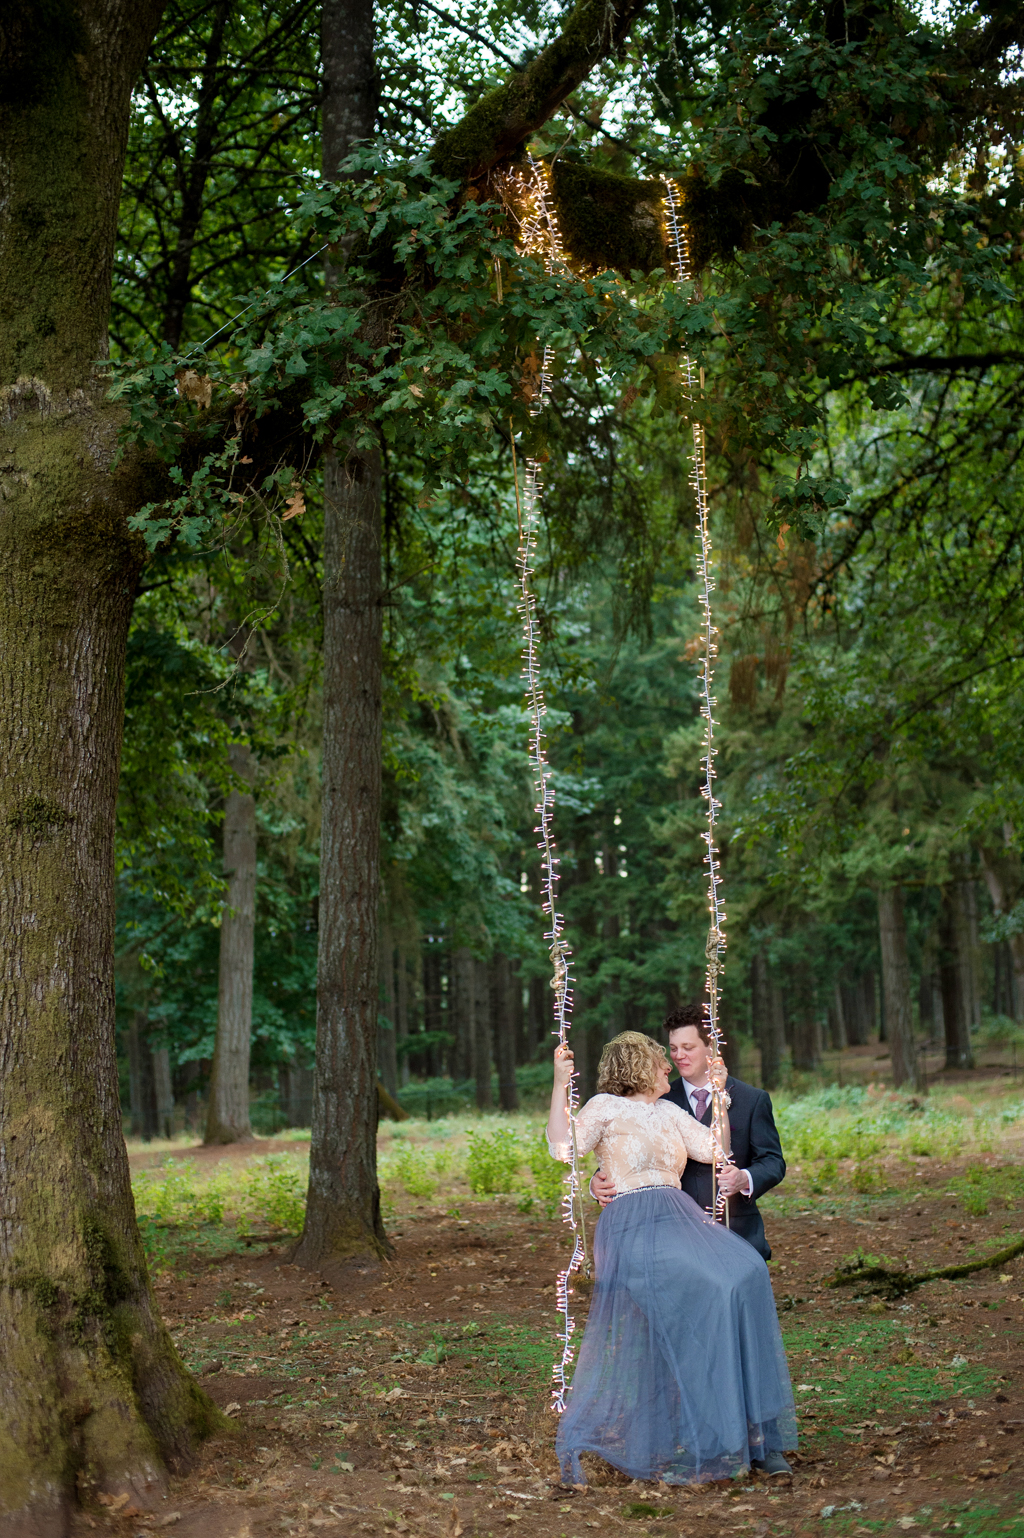 a bride in a flowy gray skirt and ivory lace top swings from a tree swing covered in lights as her groom pushes her